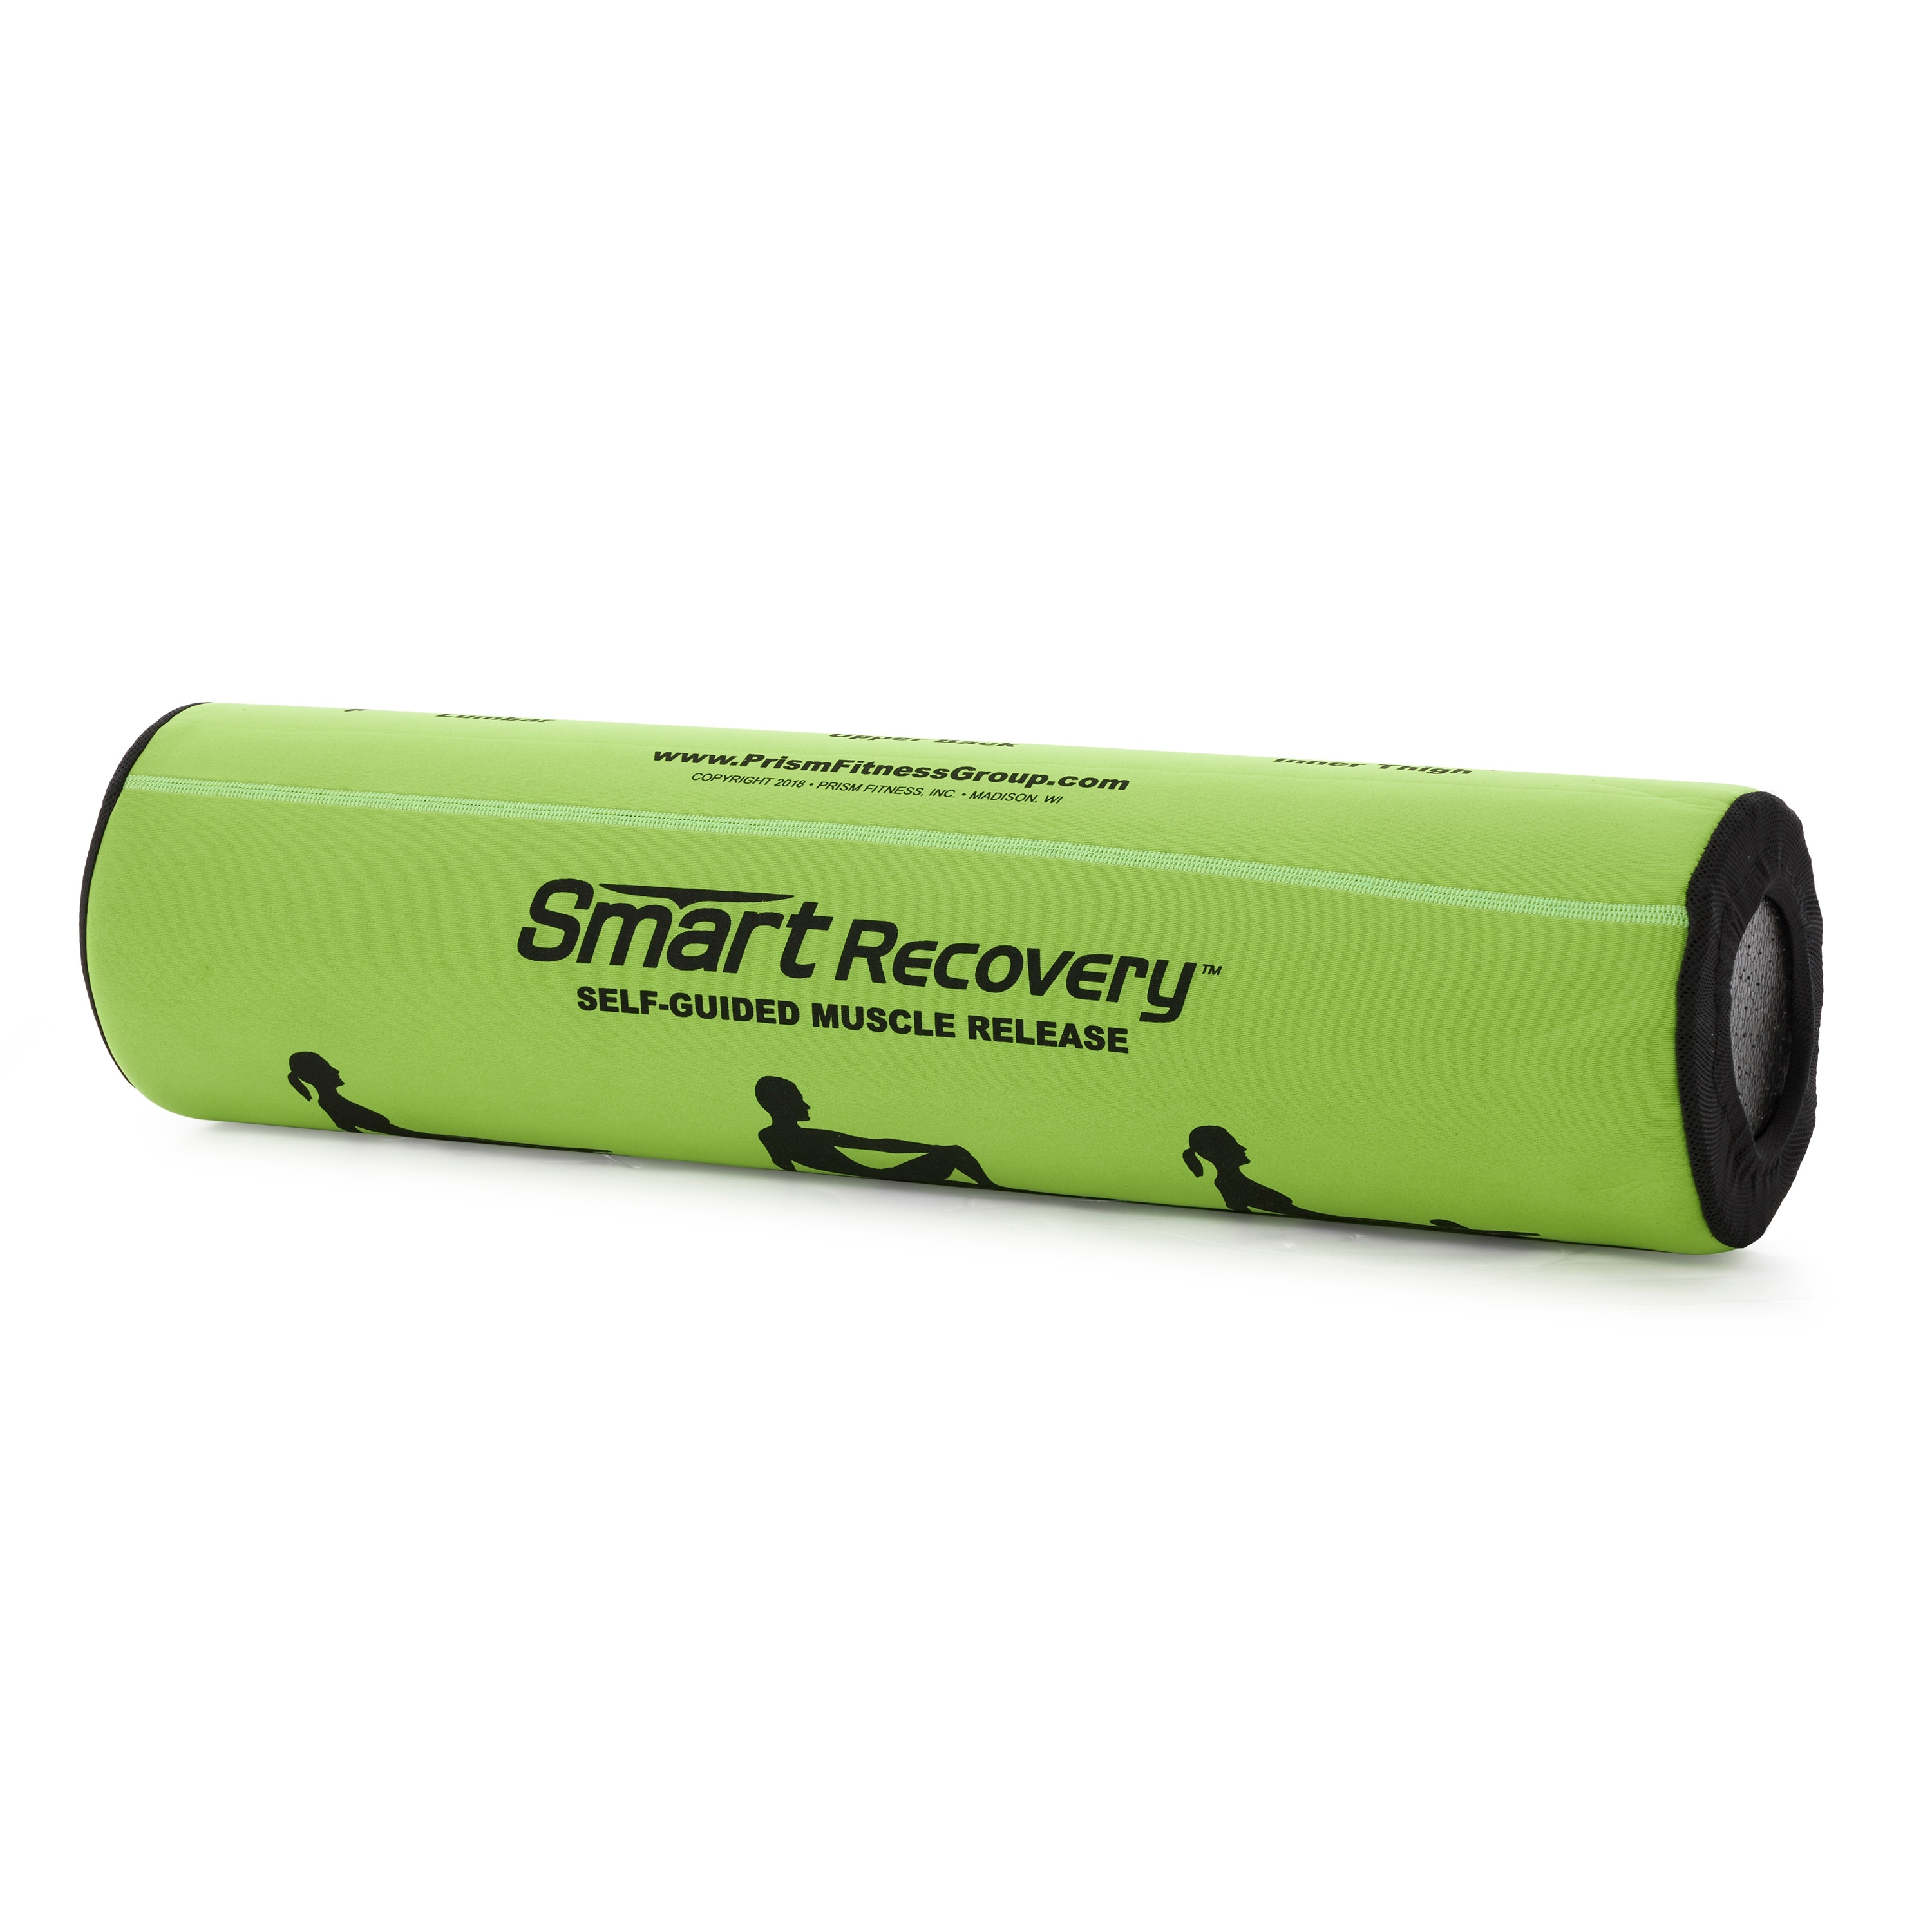 Prism Fitness 2 Foot Long Smart Recovery Self-Guided Muscle Recovery Roller  - 1.5 - Bed Bath & Beyond - 36249570